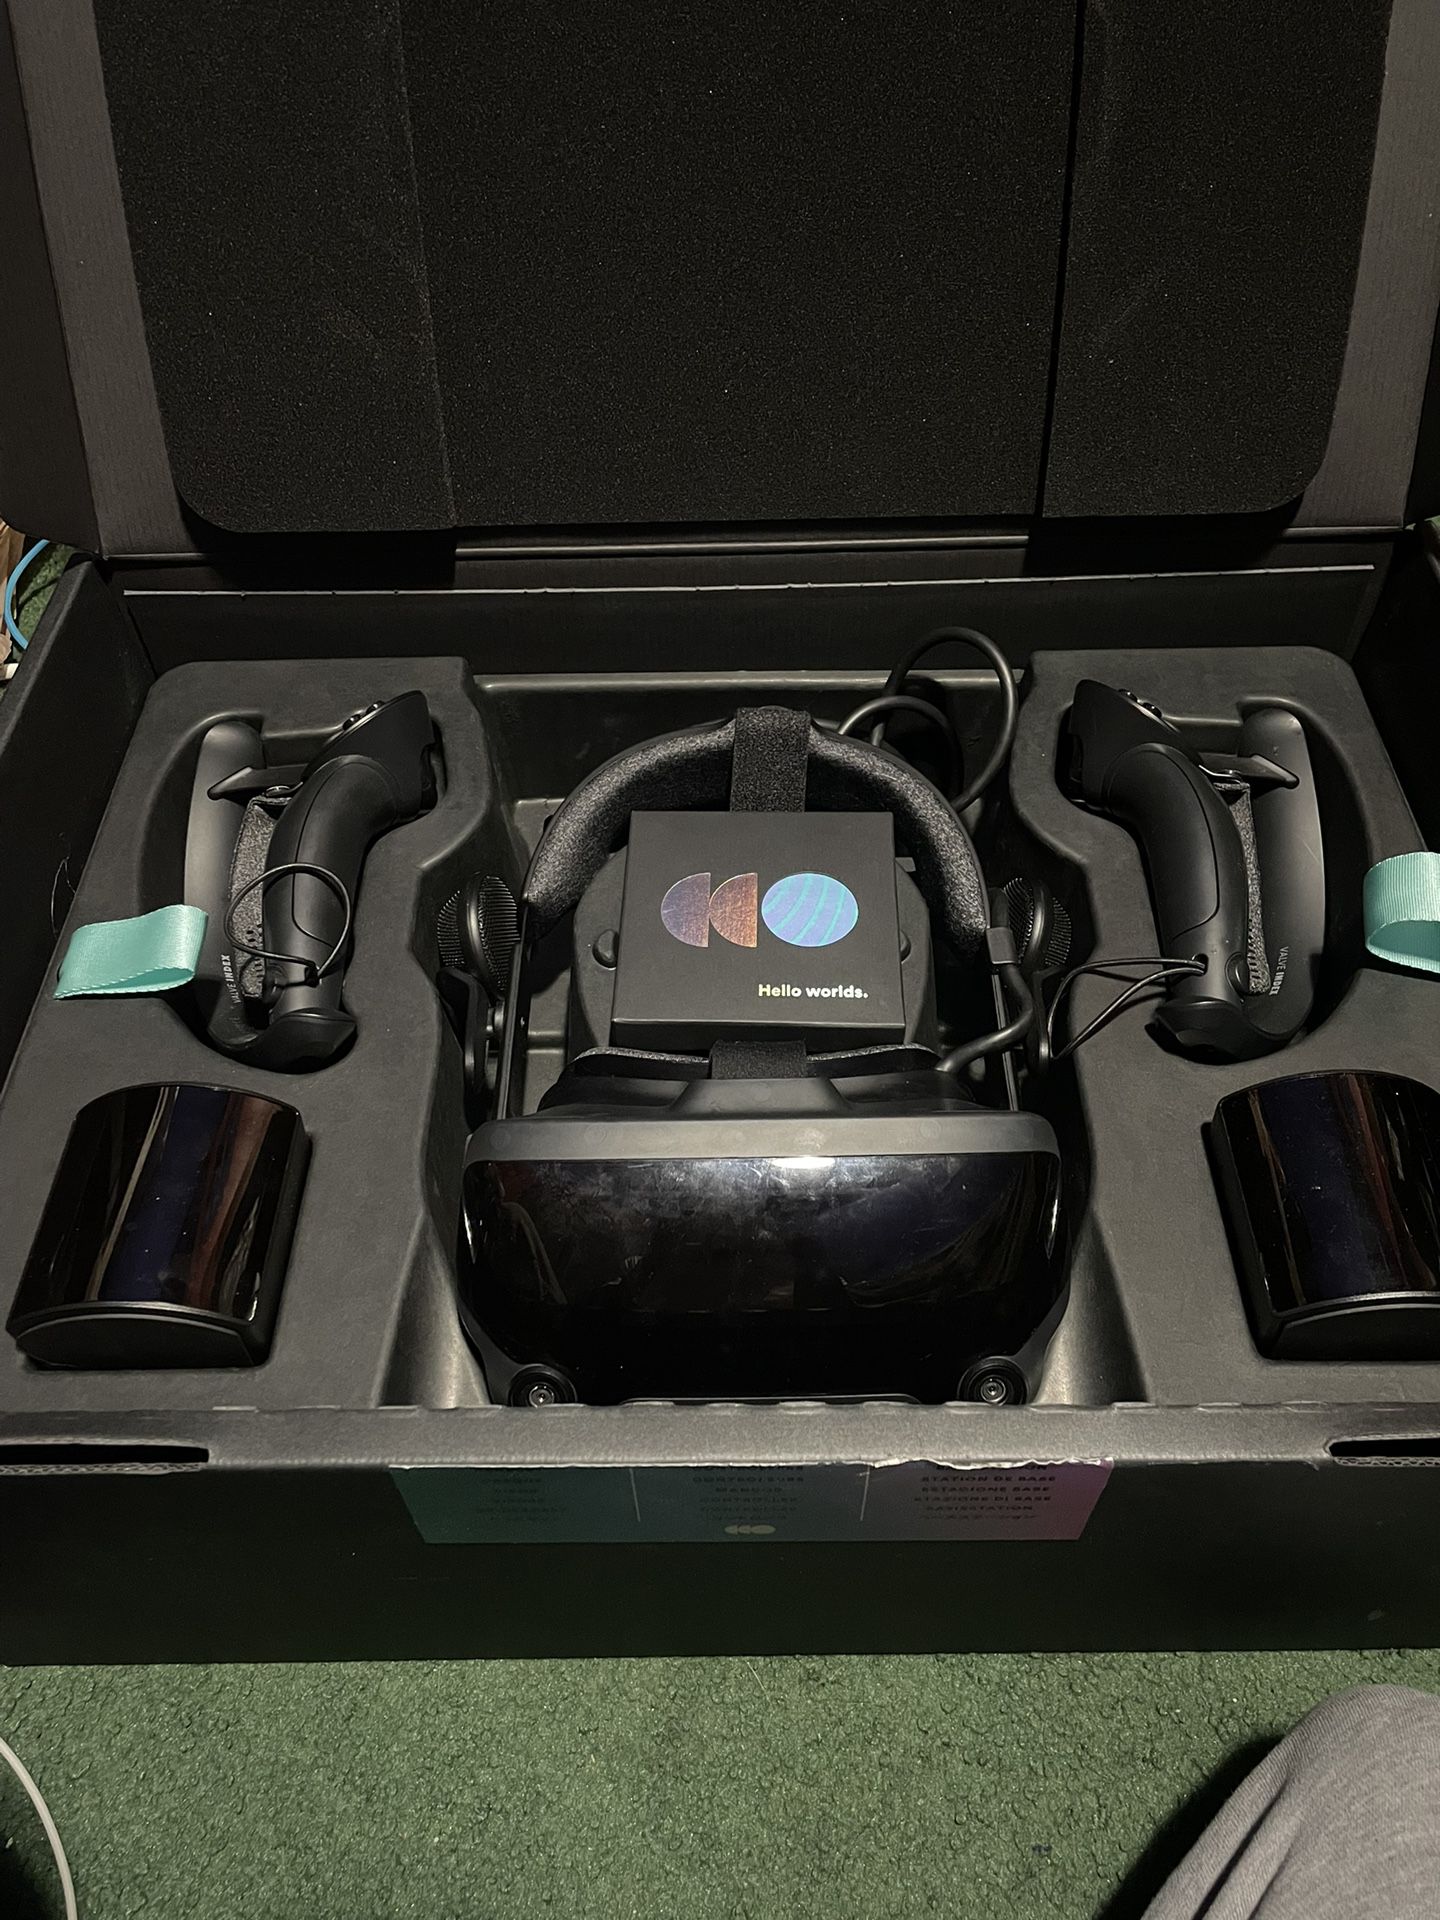 Valve Index PC And Console VR Headset Full Kit - Black Used